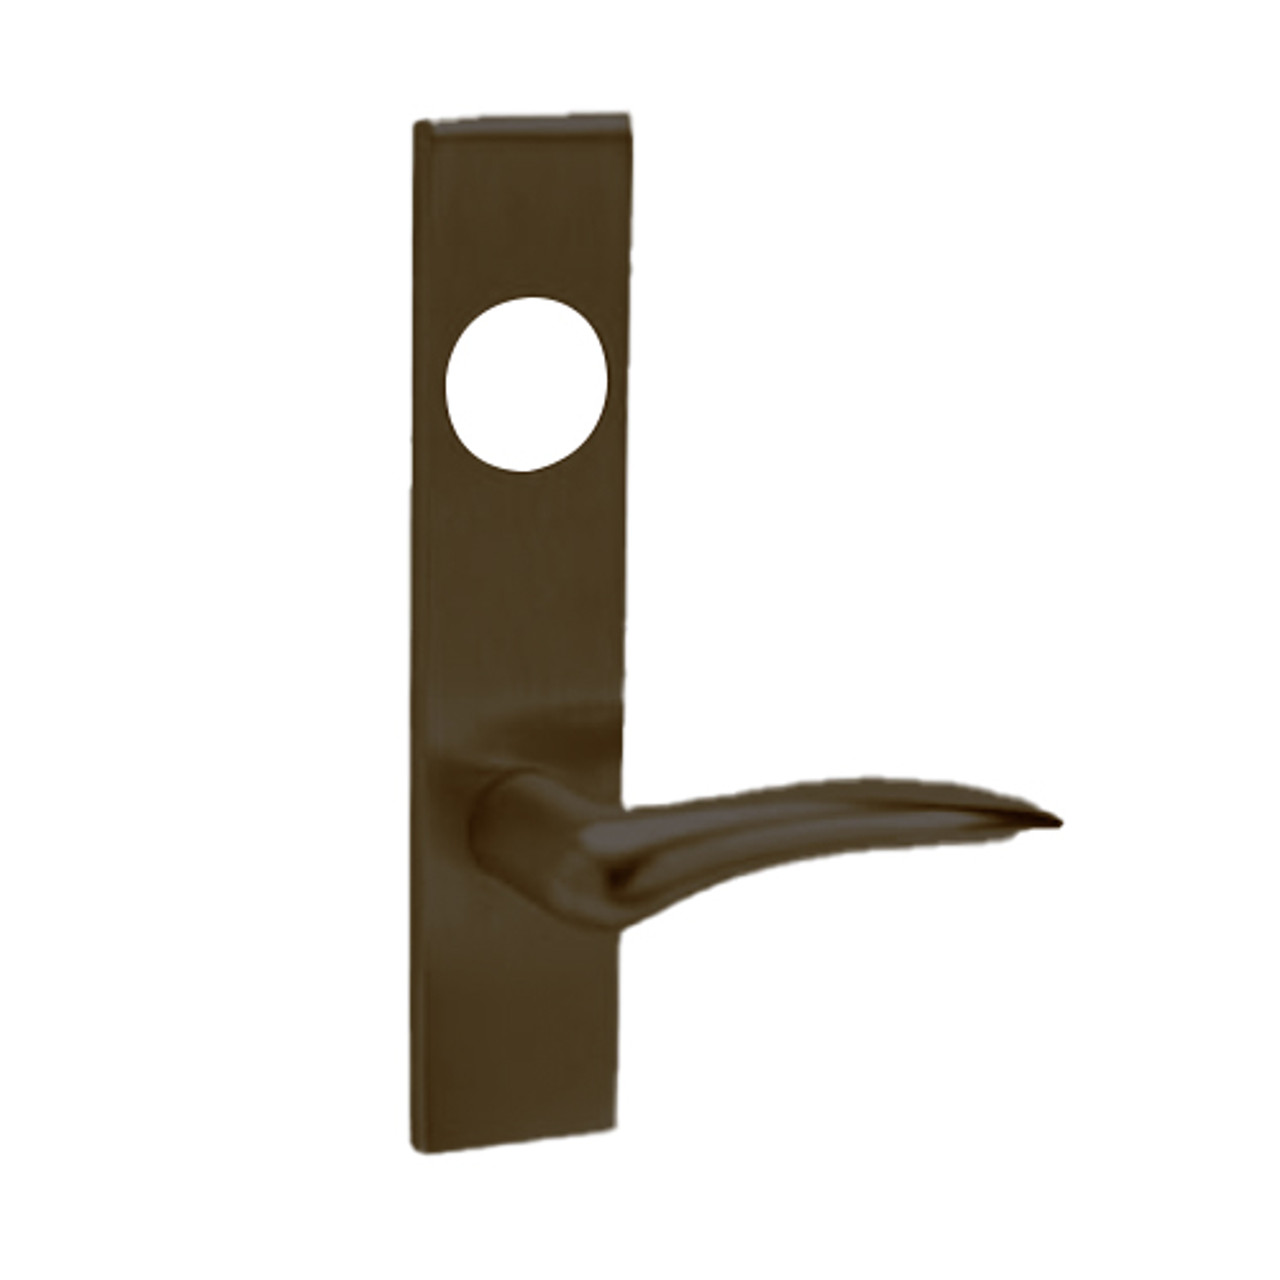 ML2042-DSR-613-LC-LH Corbin Russwin ML2000 Series Mortise Entrance Locksets with Dirke Lever in Oil Rubbed Bronze